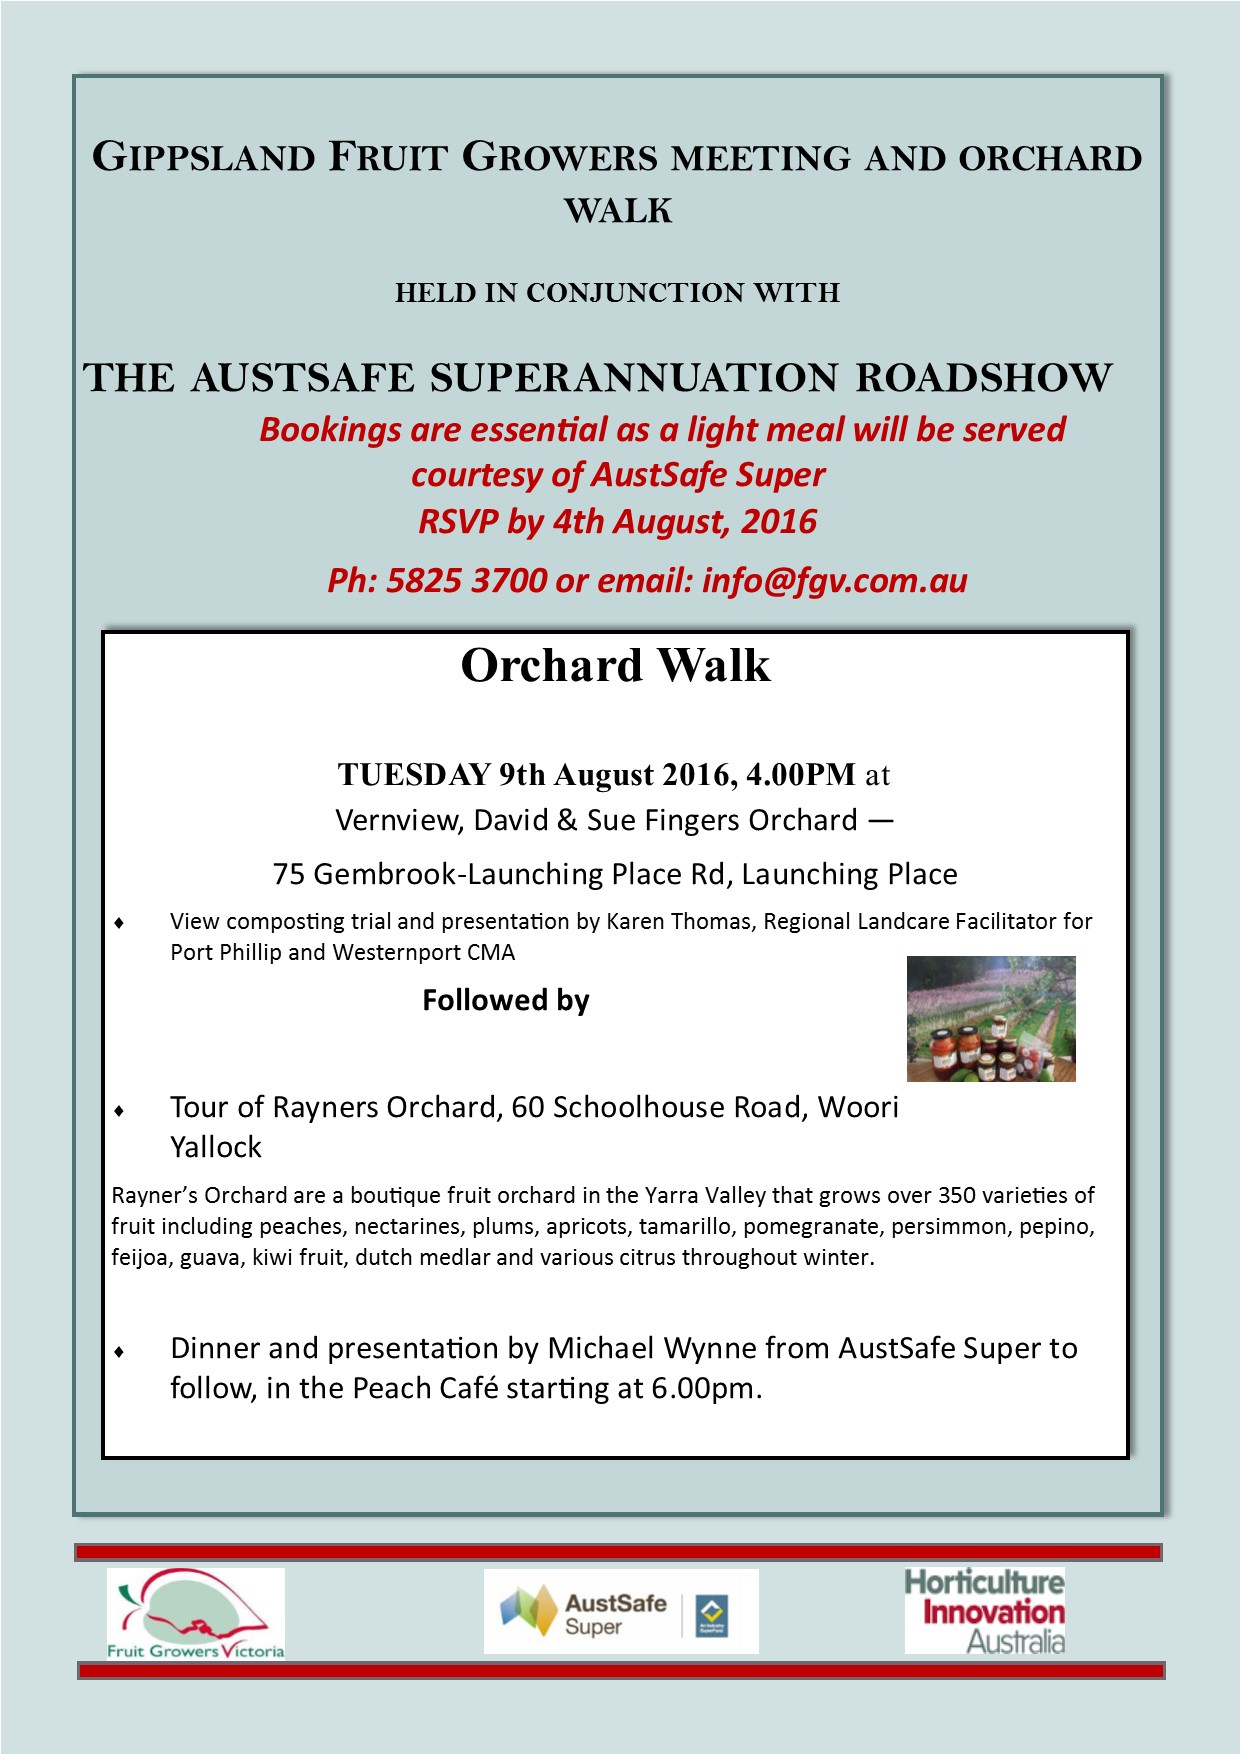 Gippsland Fruit Grower Meeting & Orchard Walk being held in conjunction with Austsafe Super Roadshow